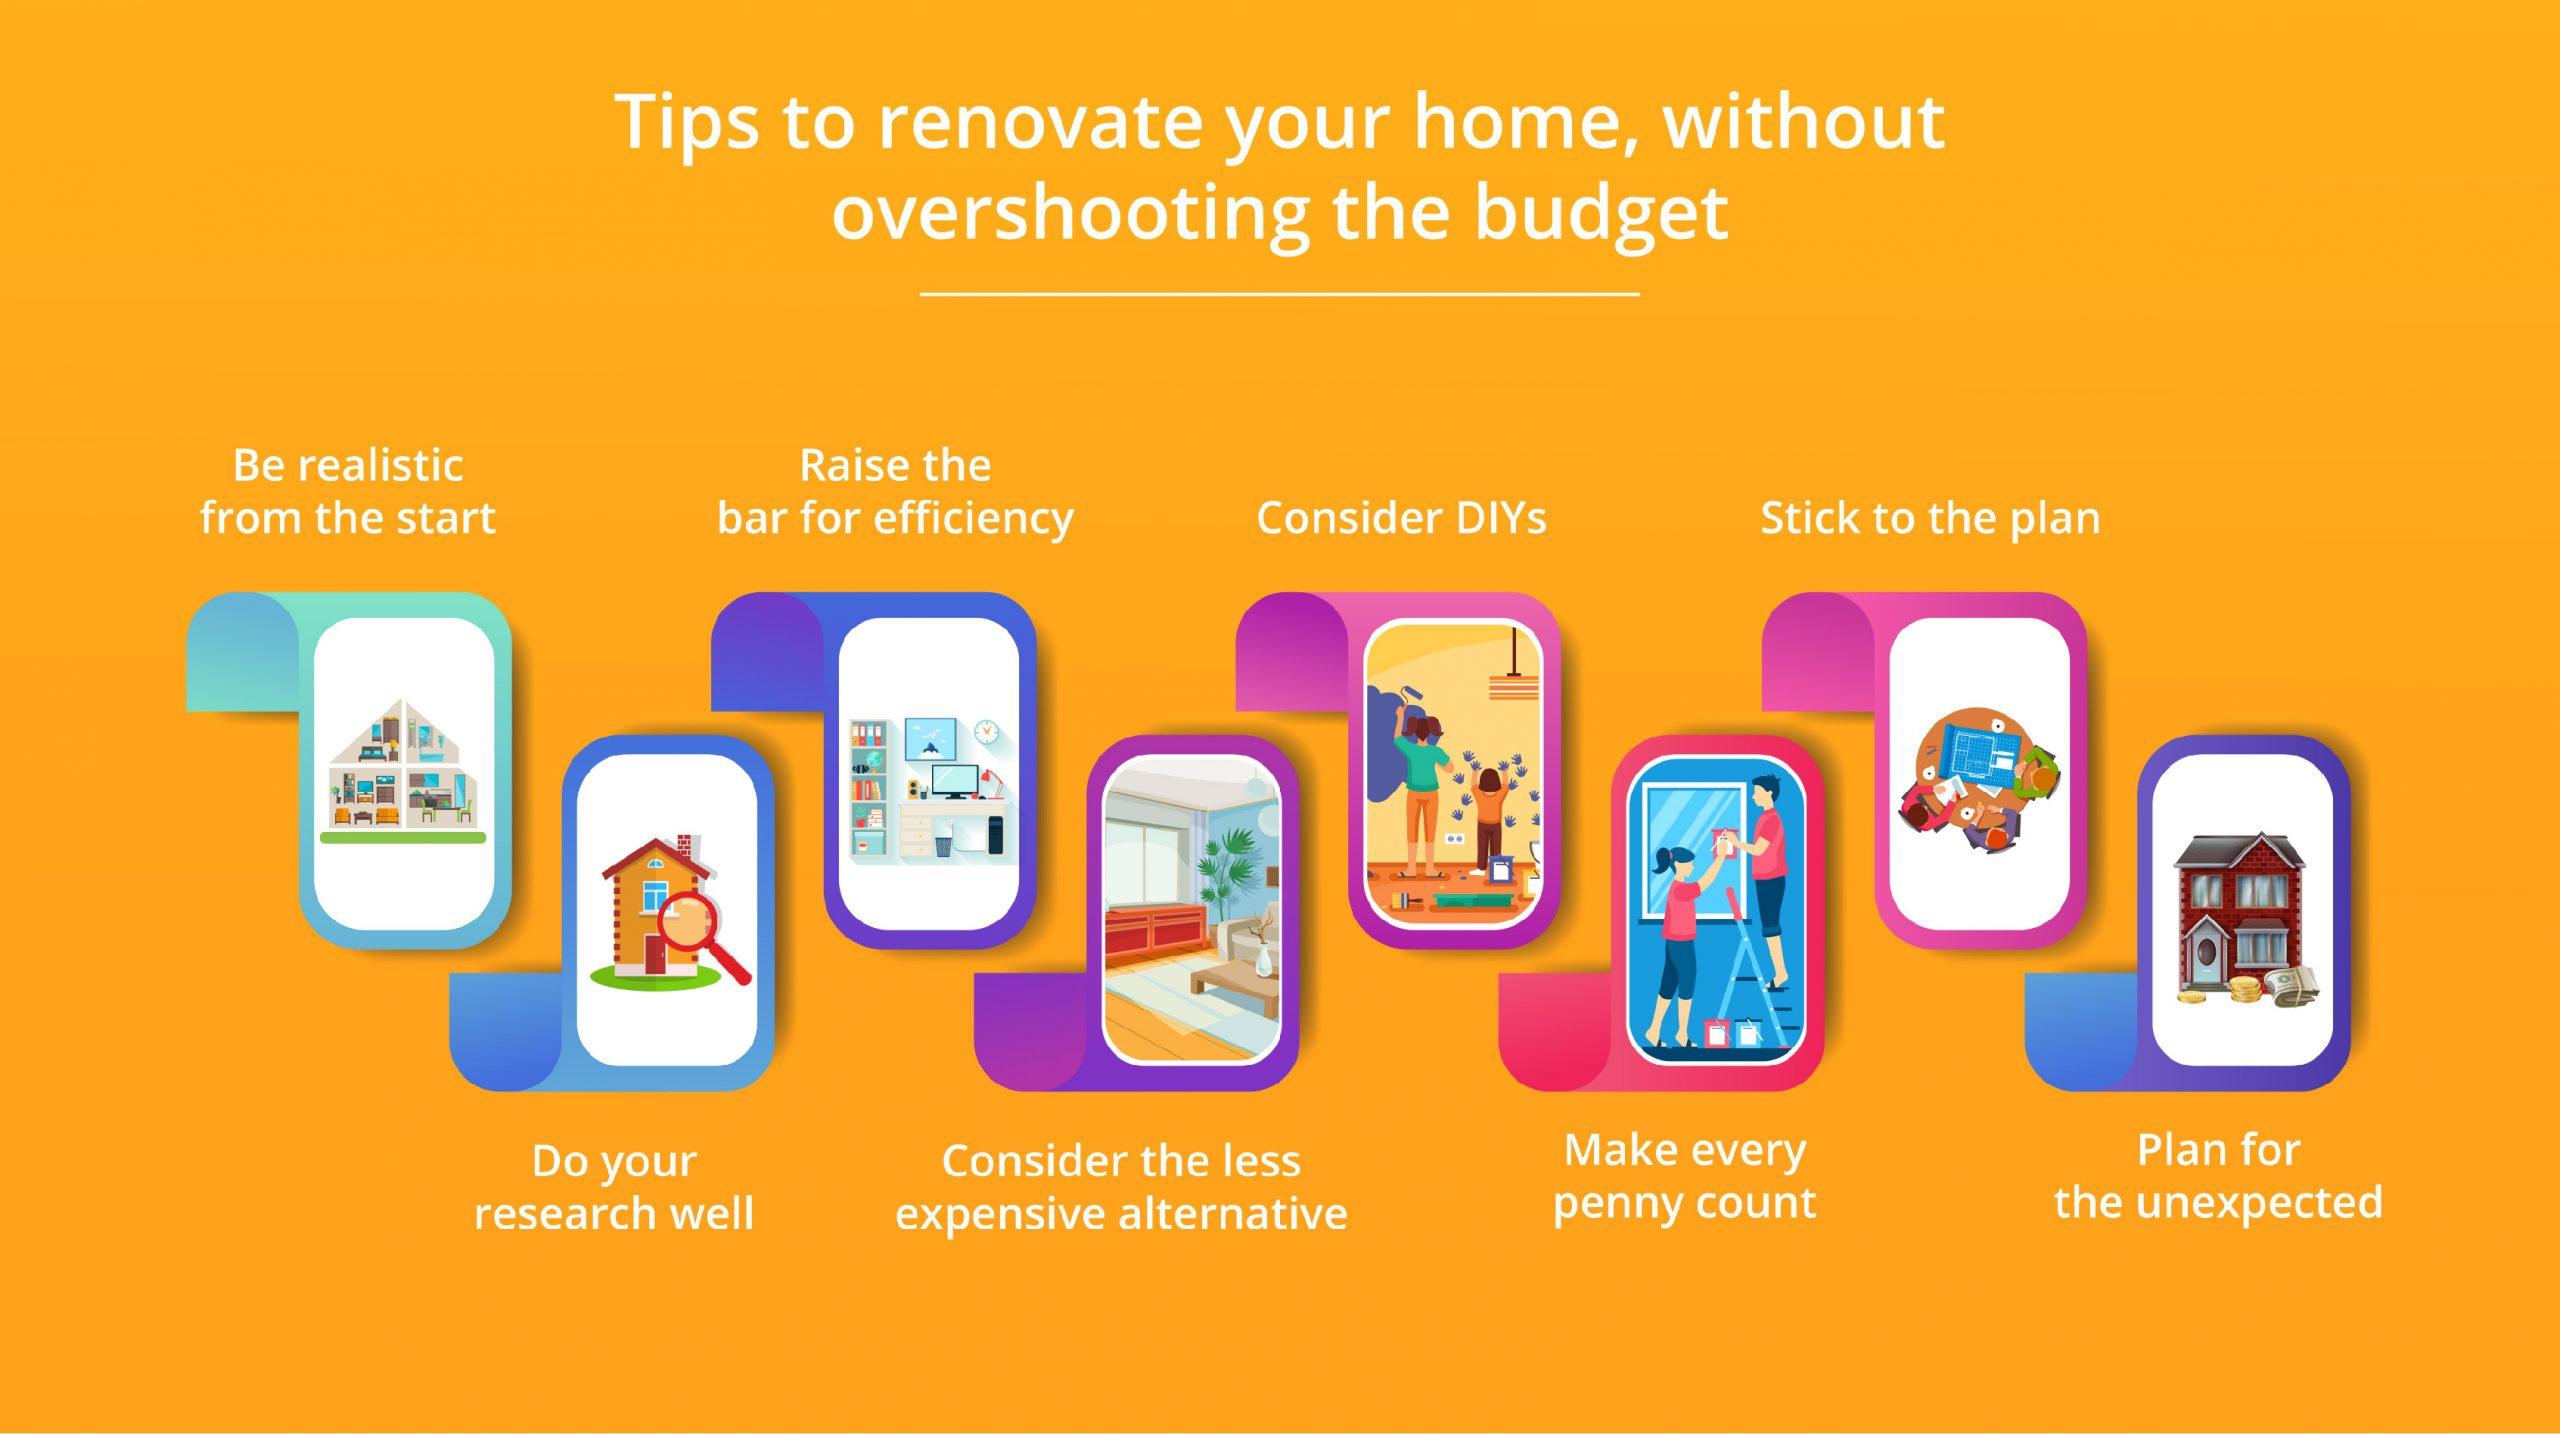 Tips to renovate your home, without overshooting the budget!